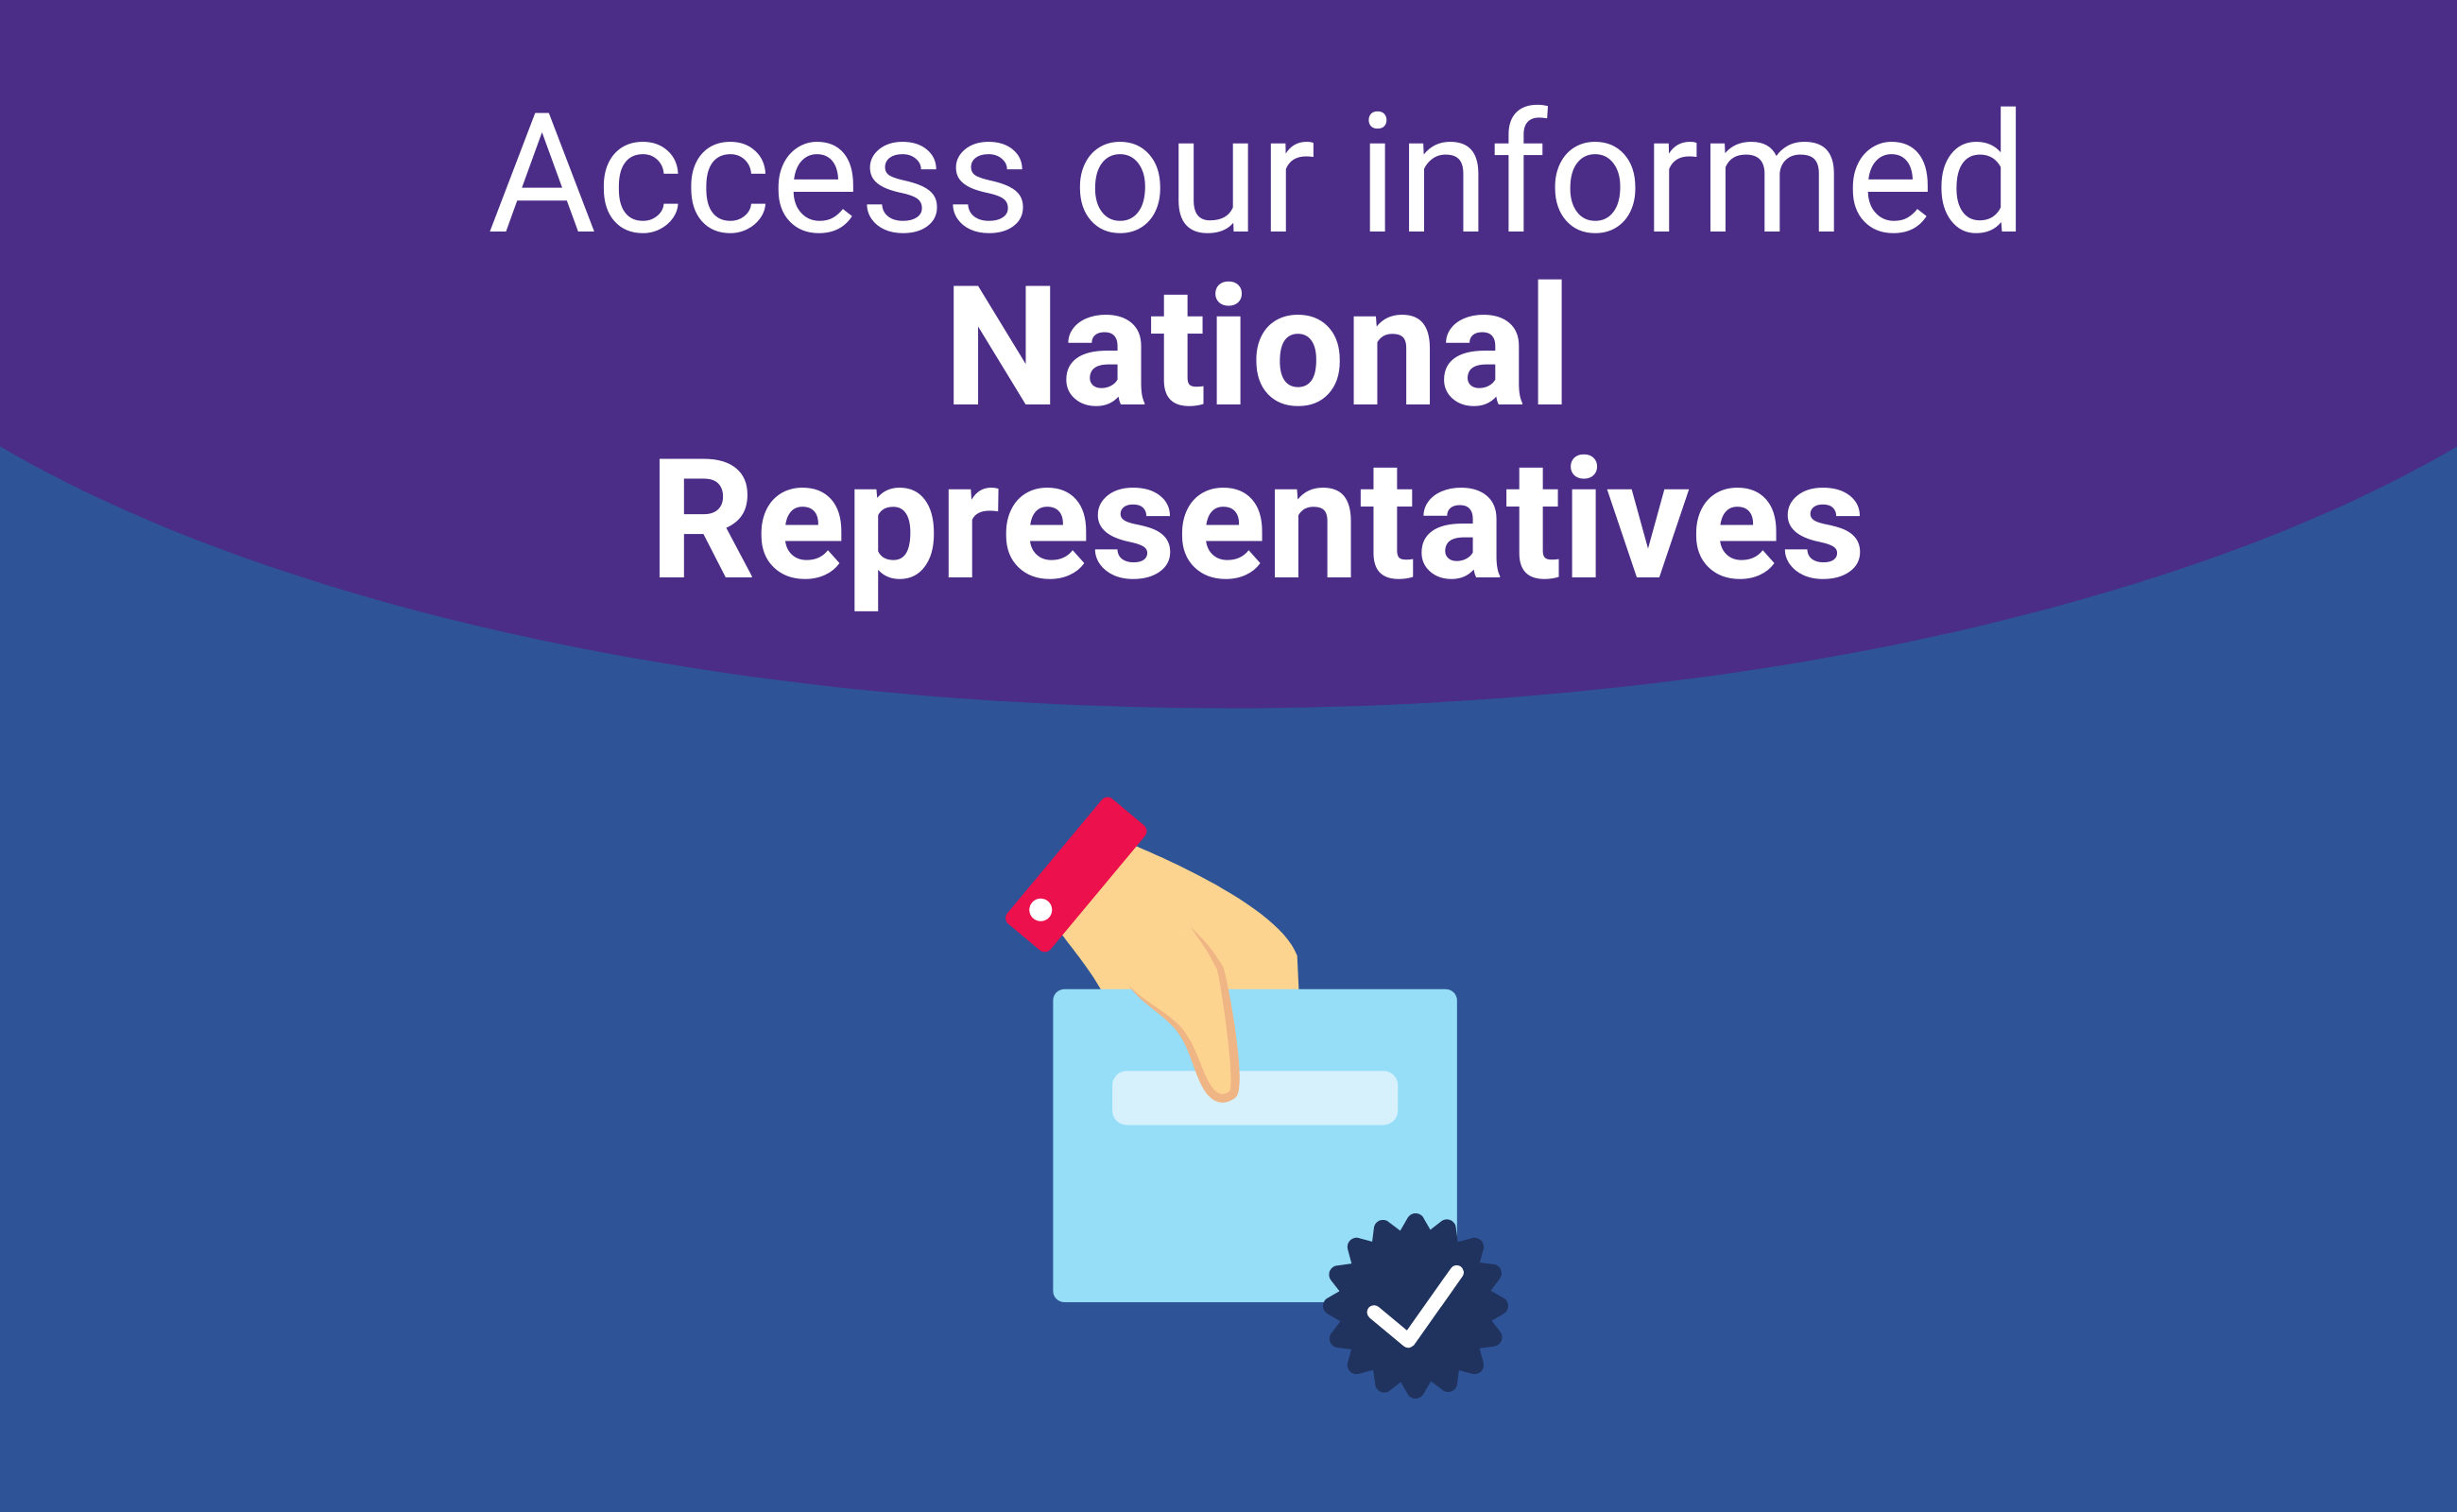 Access our informed National Representatives